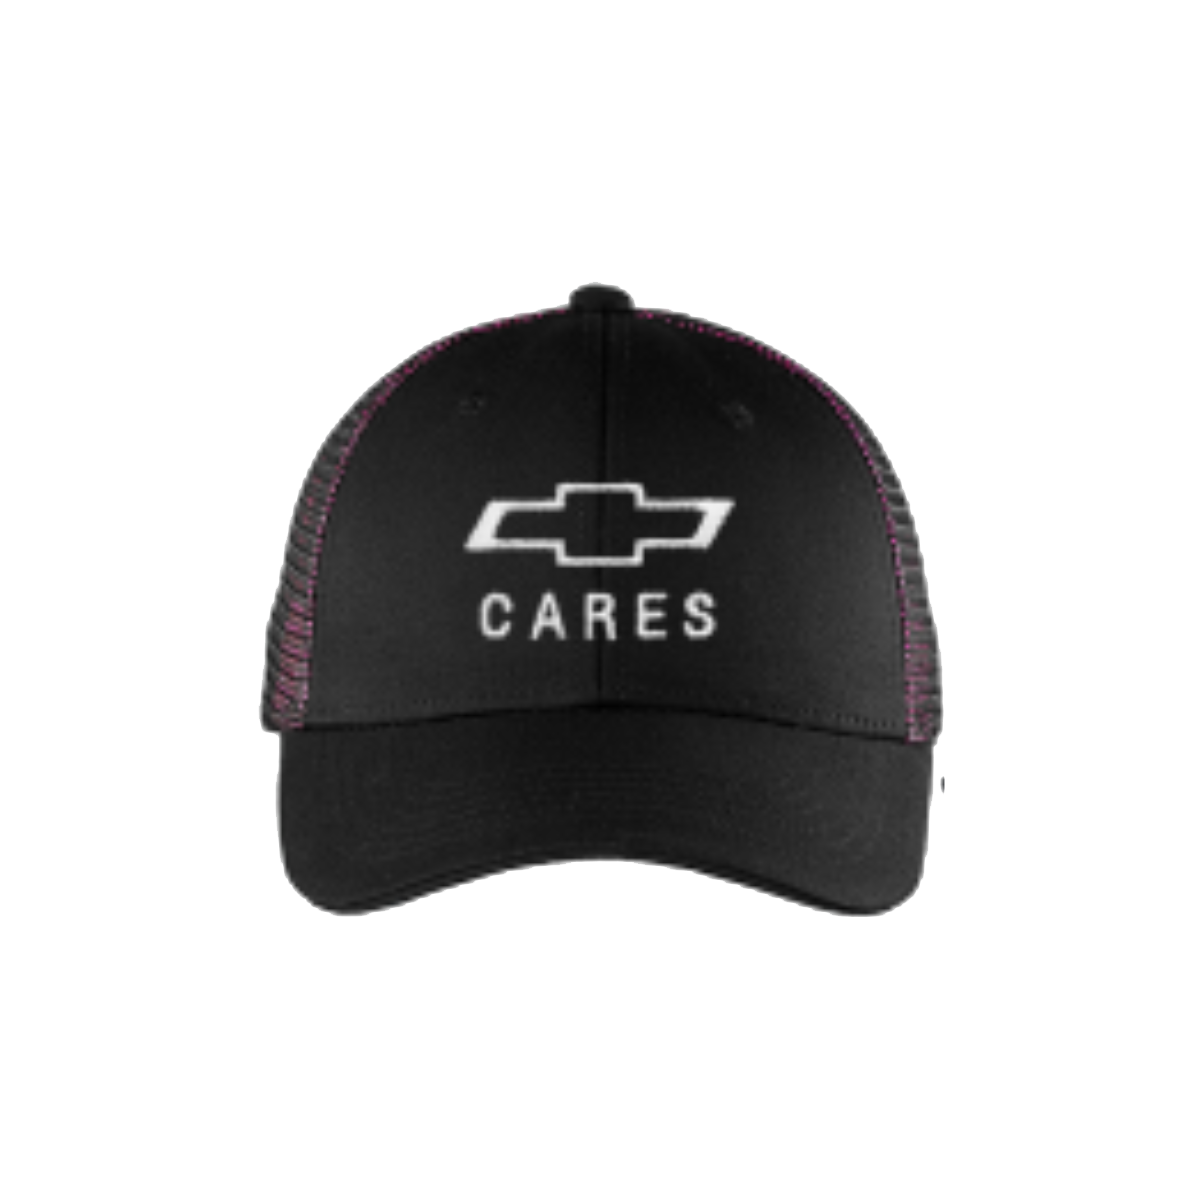 Chevy Cares BCA Mesh Hat